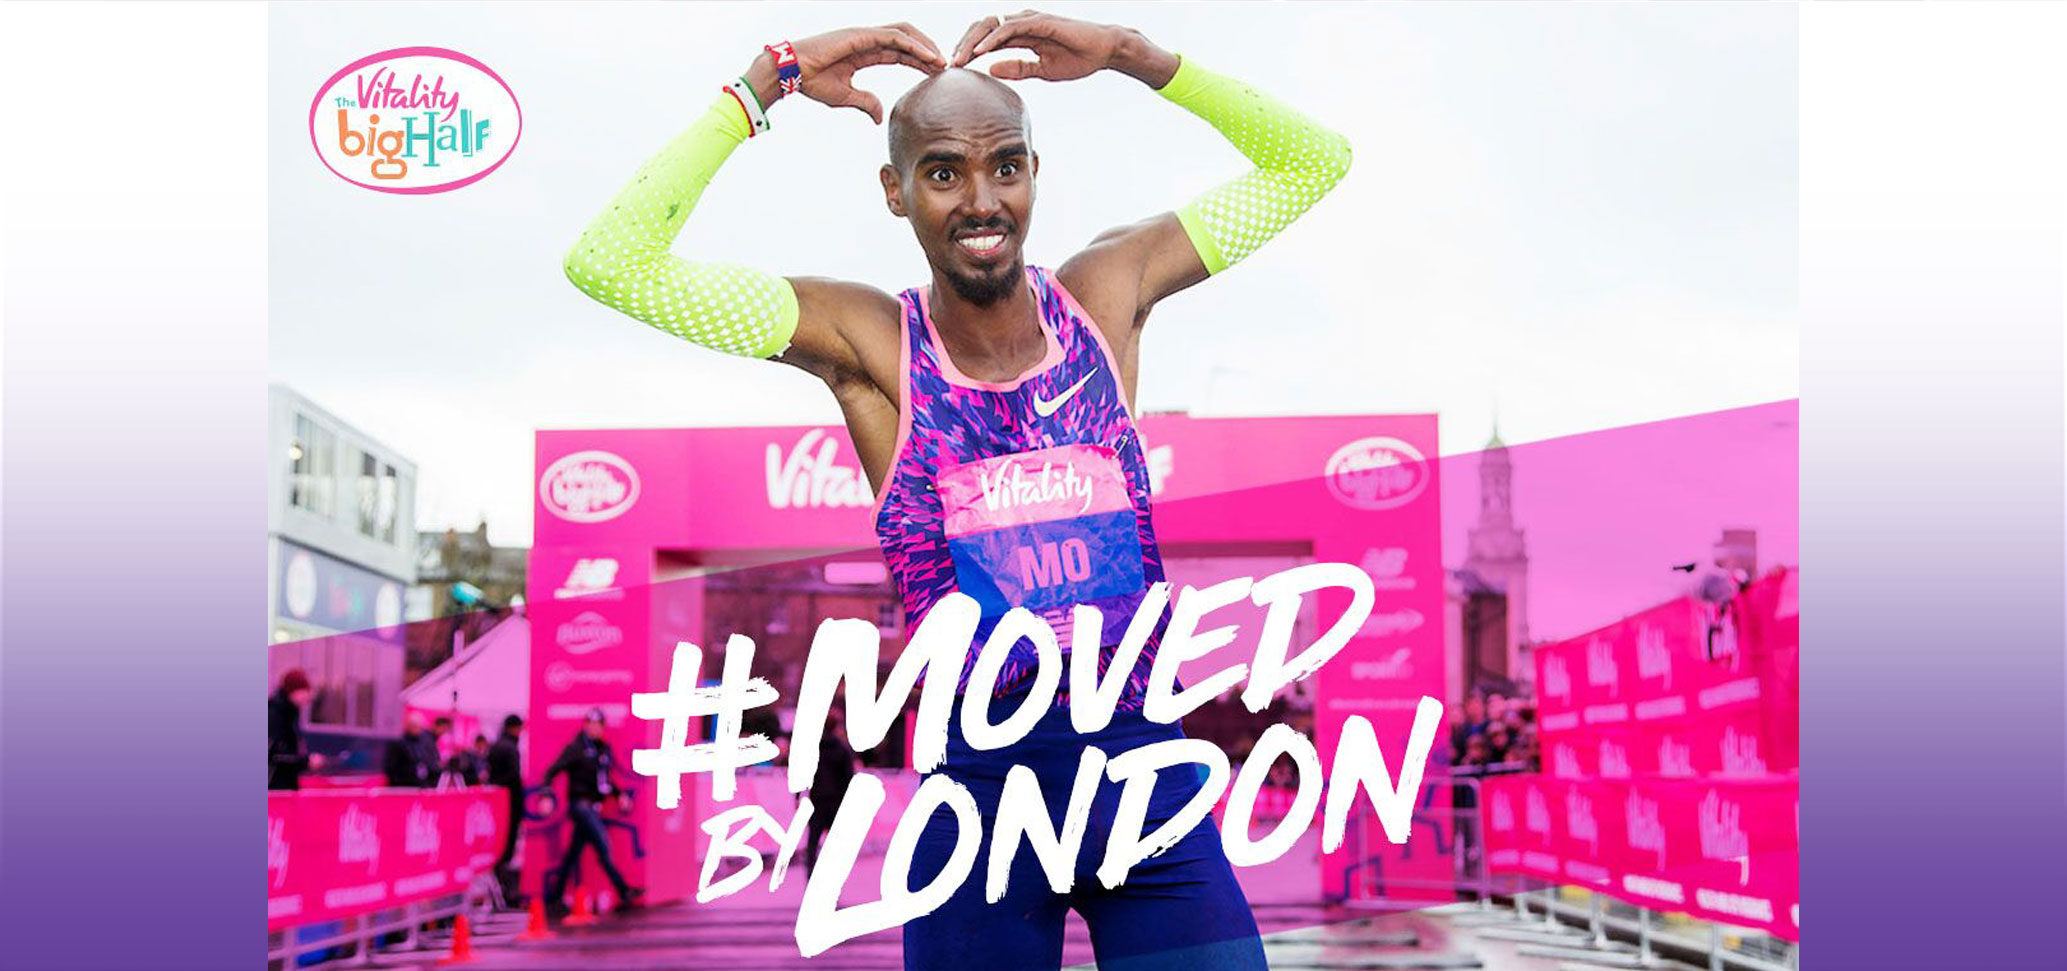 Last few places for Charity Runners in the Vitality Big Half Marathon with Sir Mo Farah.